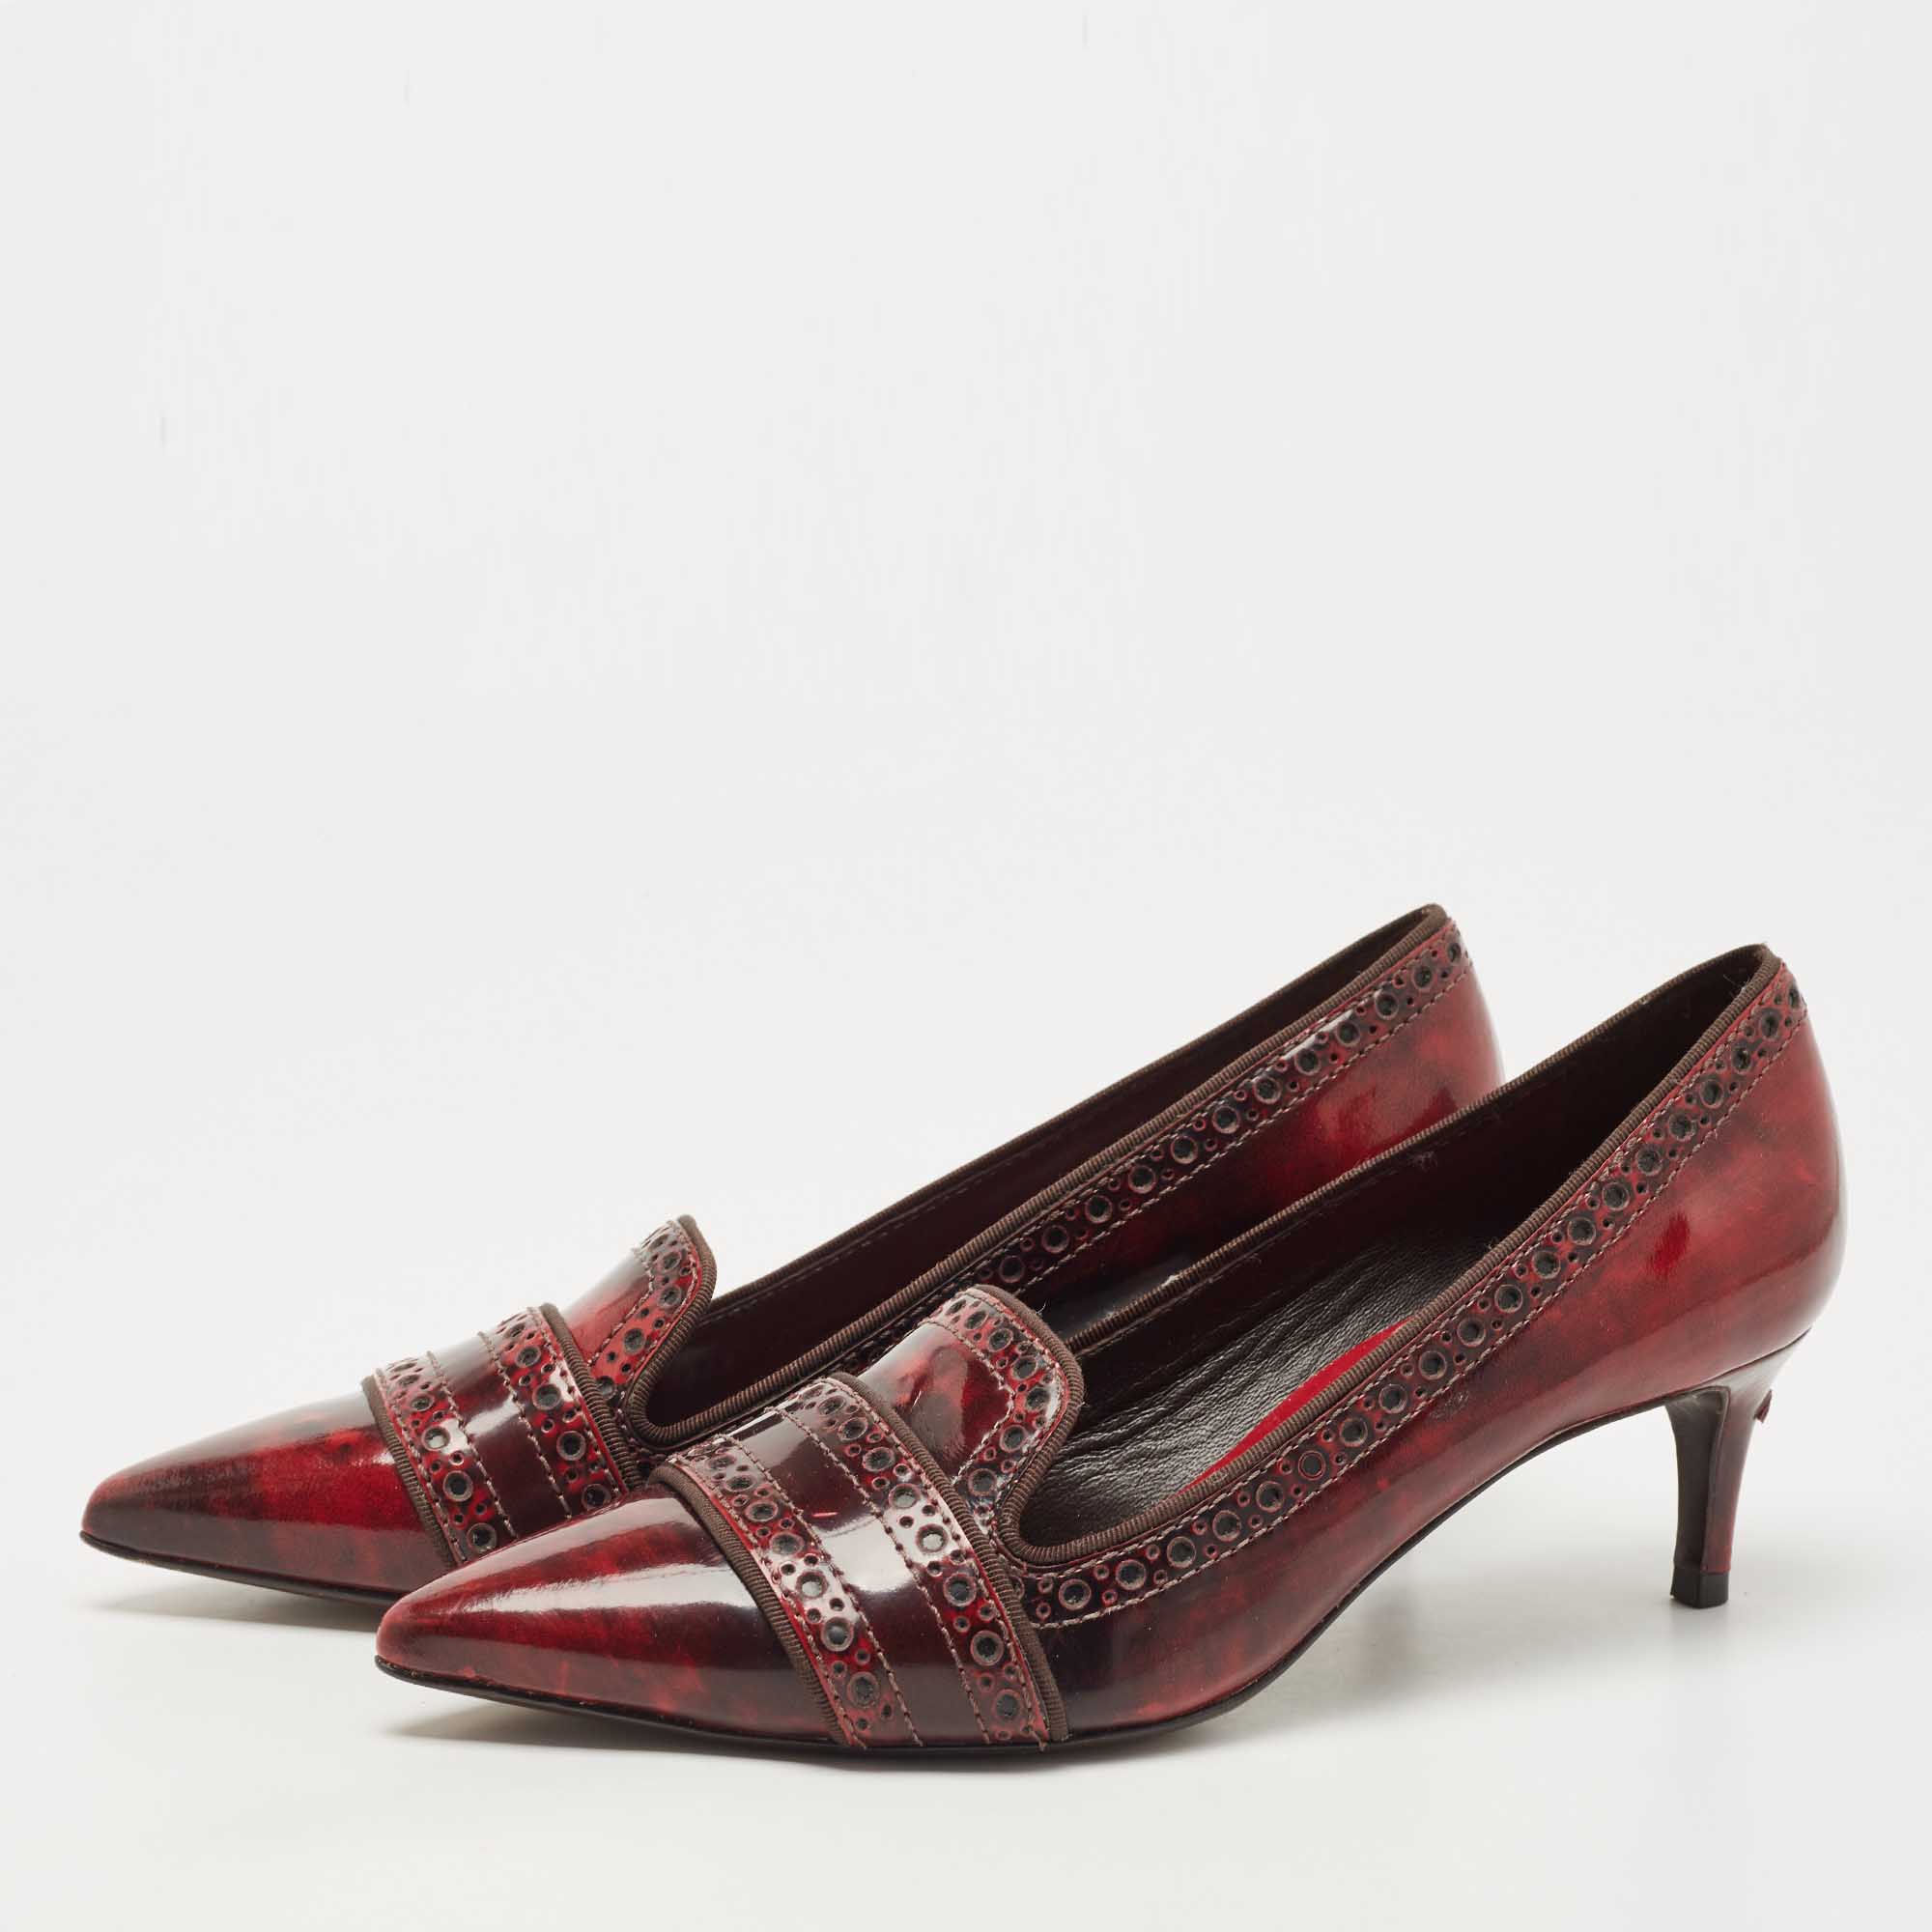 

Tory Burch Red/Black Leather Eyelet Pointed Toe Kitten Heel Pumps Size, Burgundy